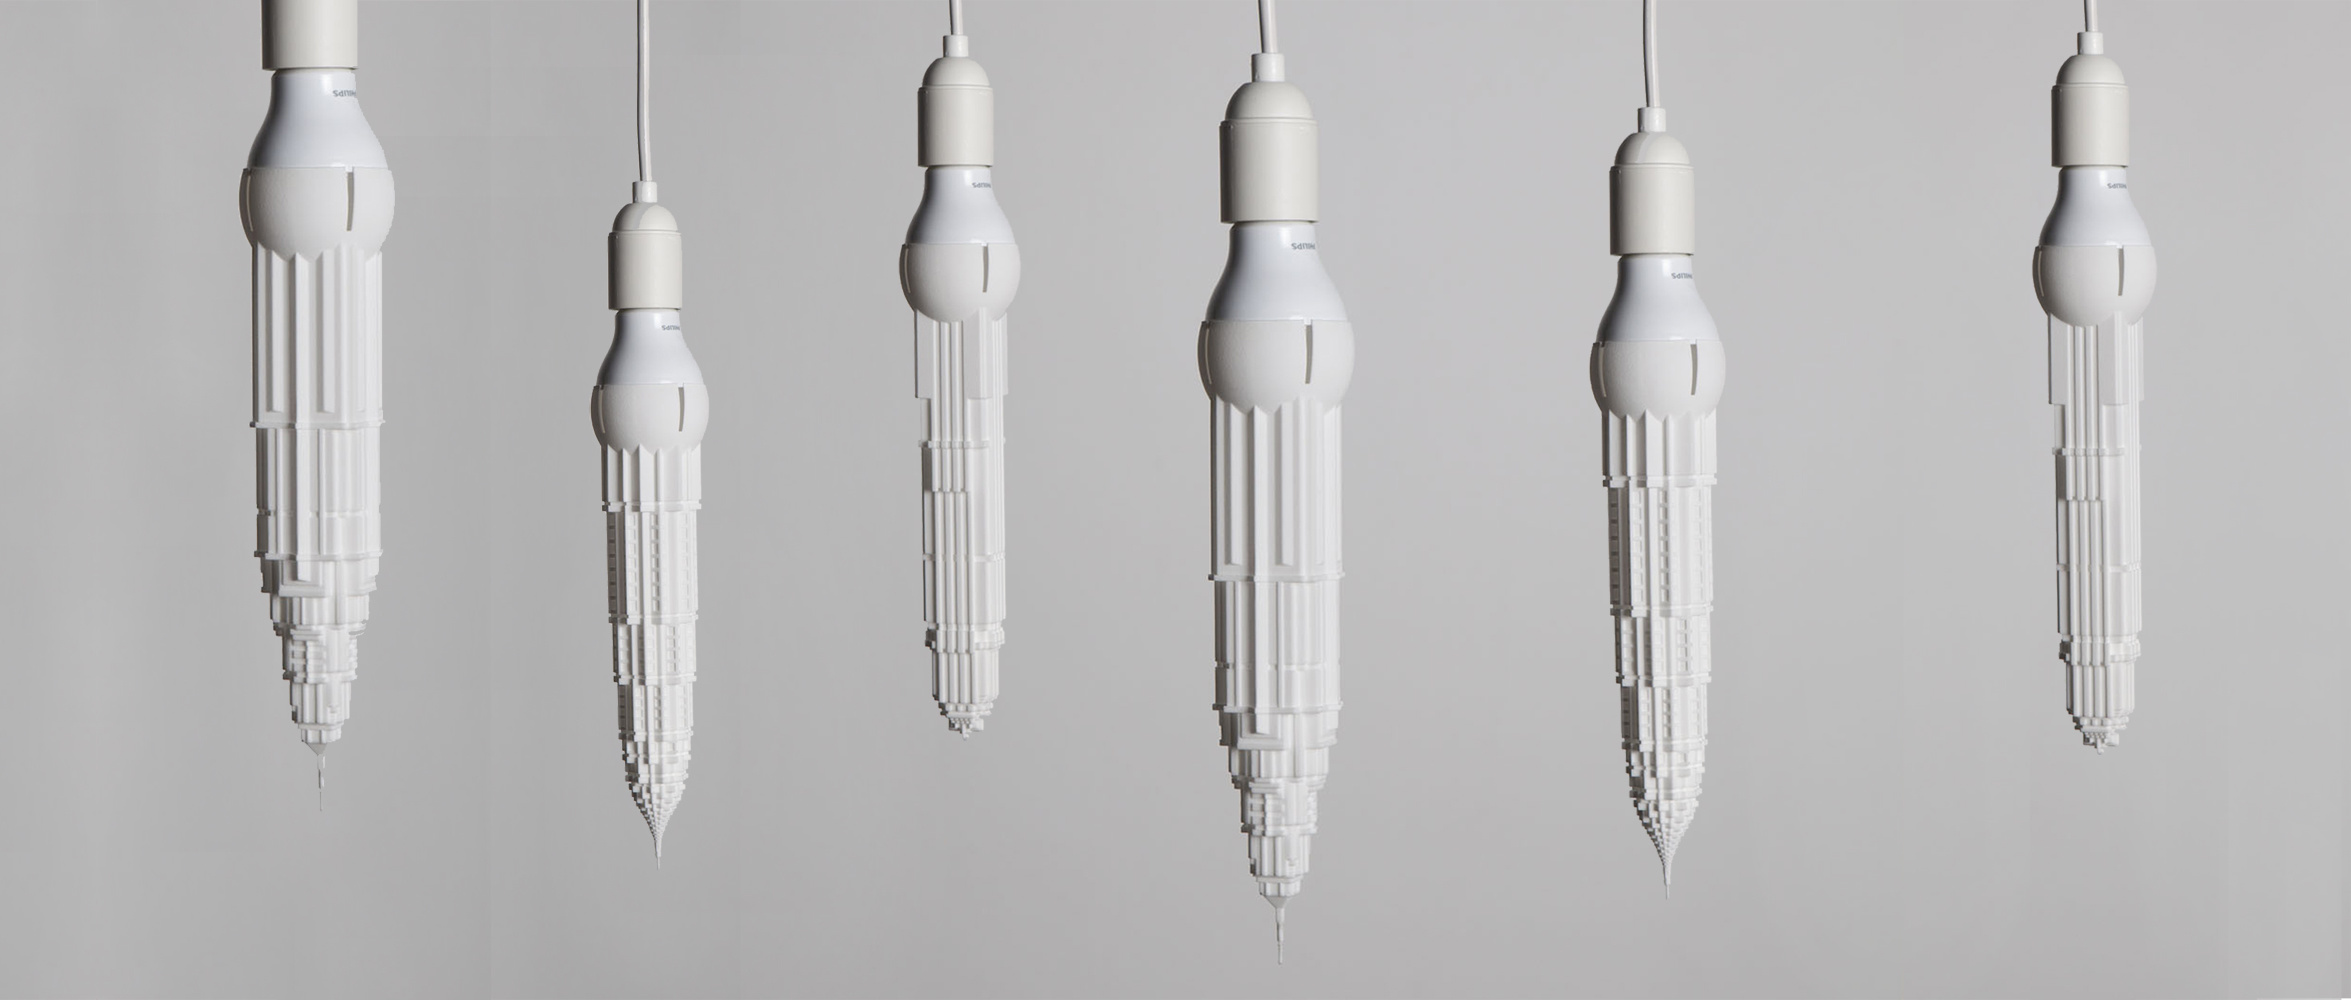 3D Printed Bulb Shades Depicting Upside-Down Skyscrapers: The Stalaclights Collection